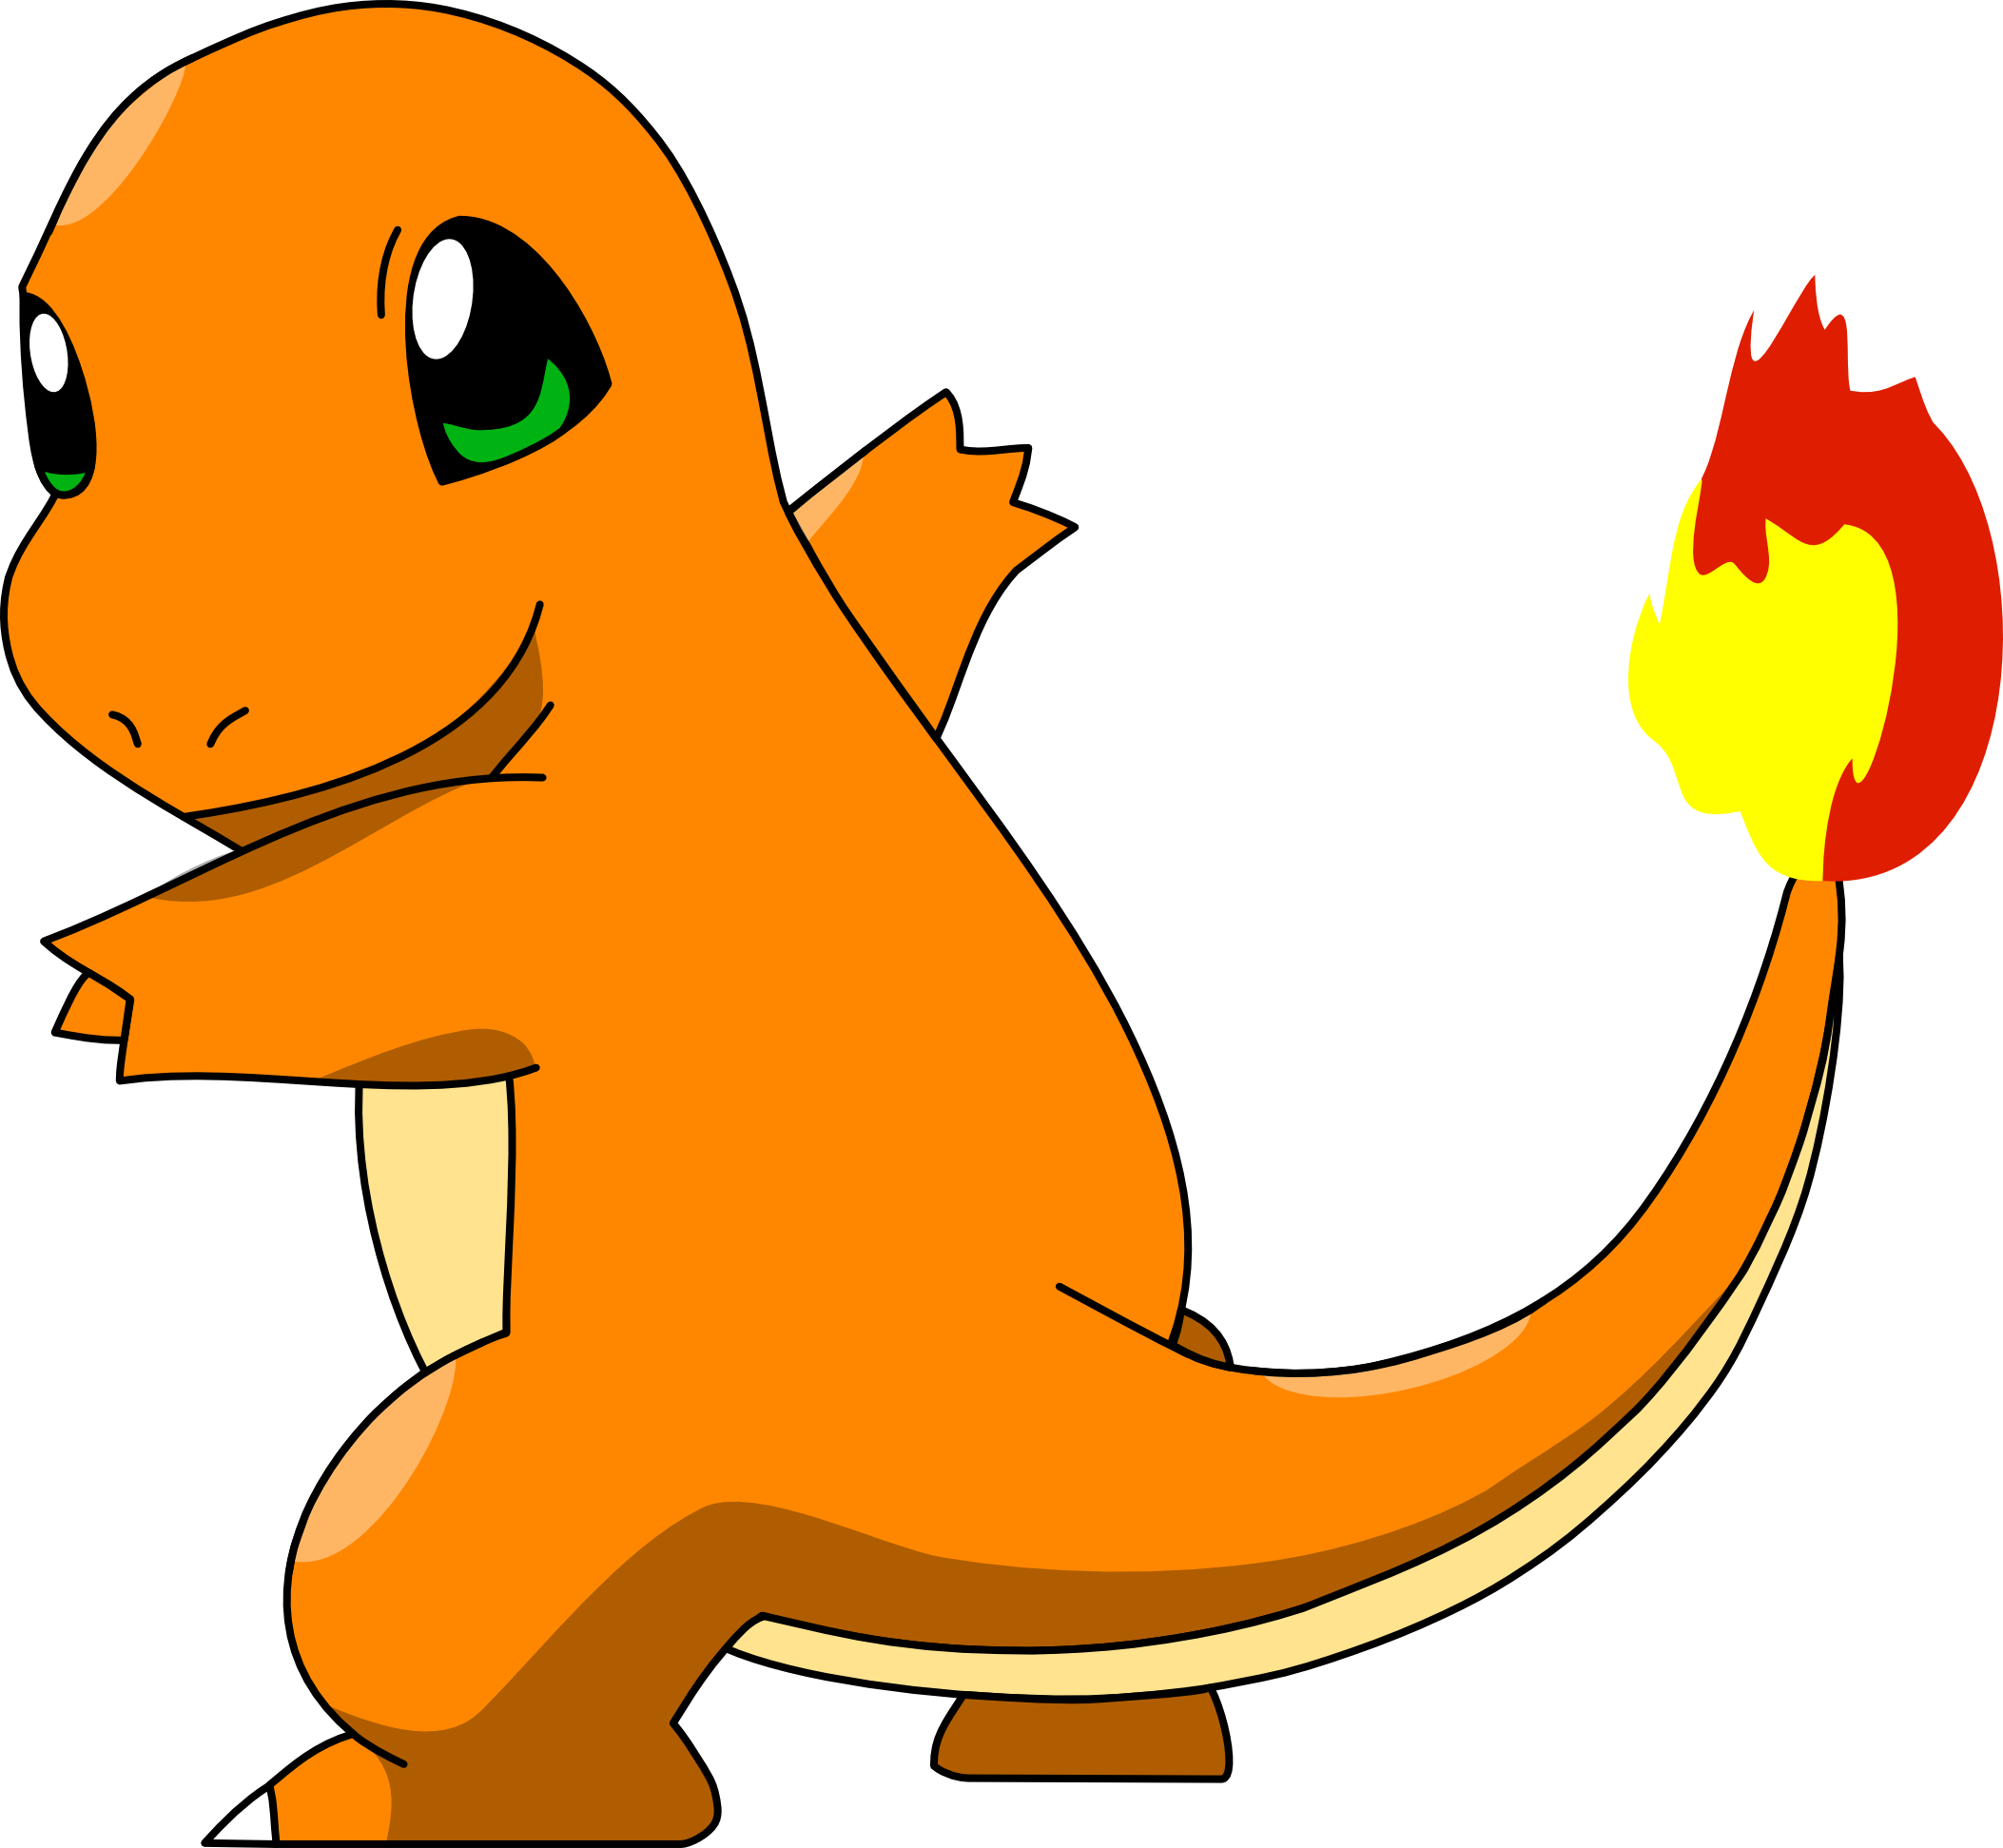 Download and share clipart about Charmander By Mighty355 Charmander By Migh...